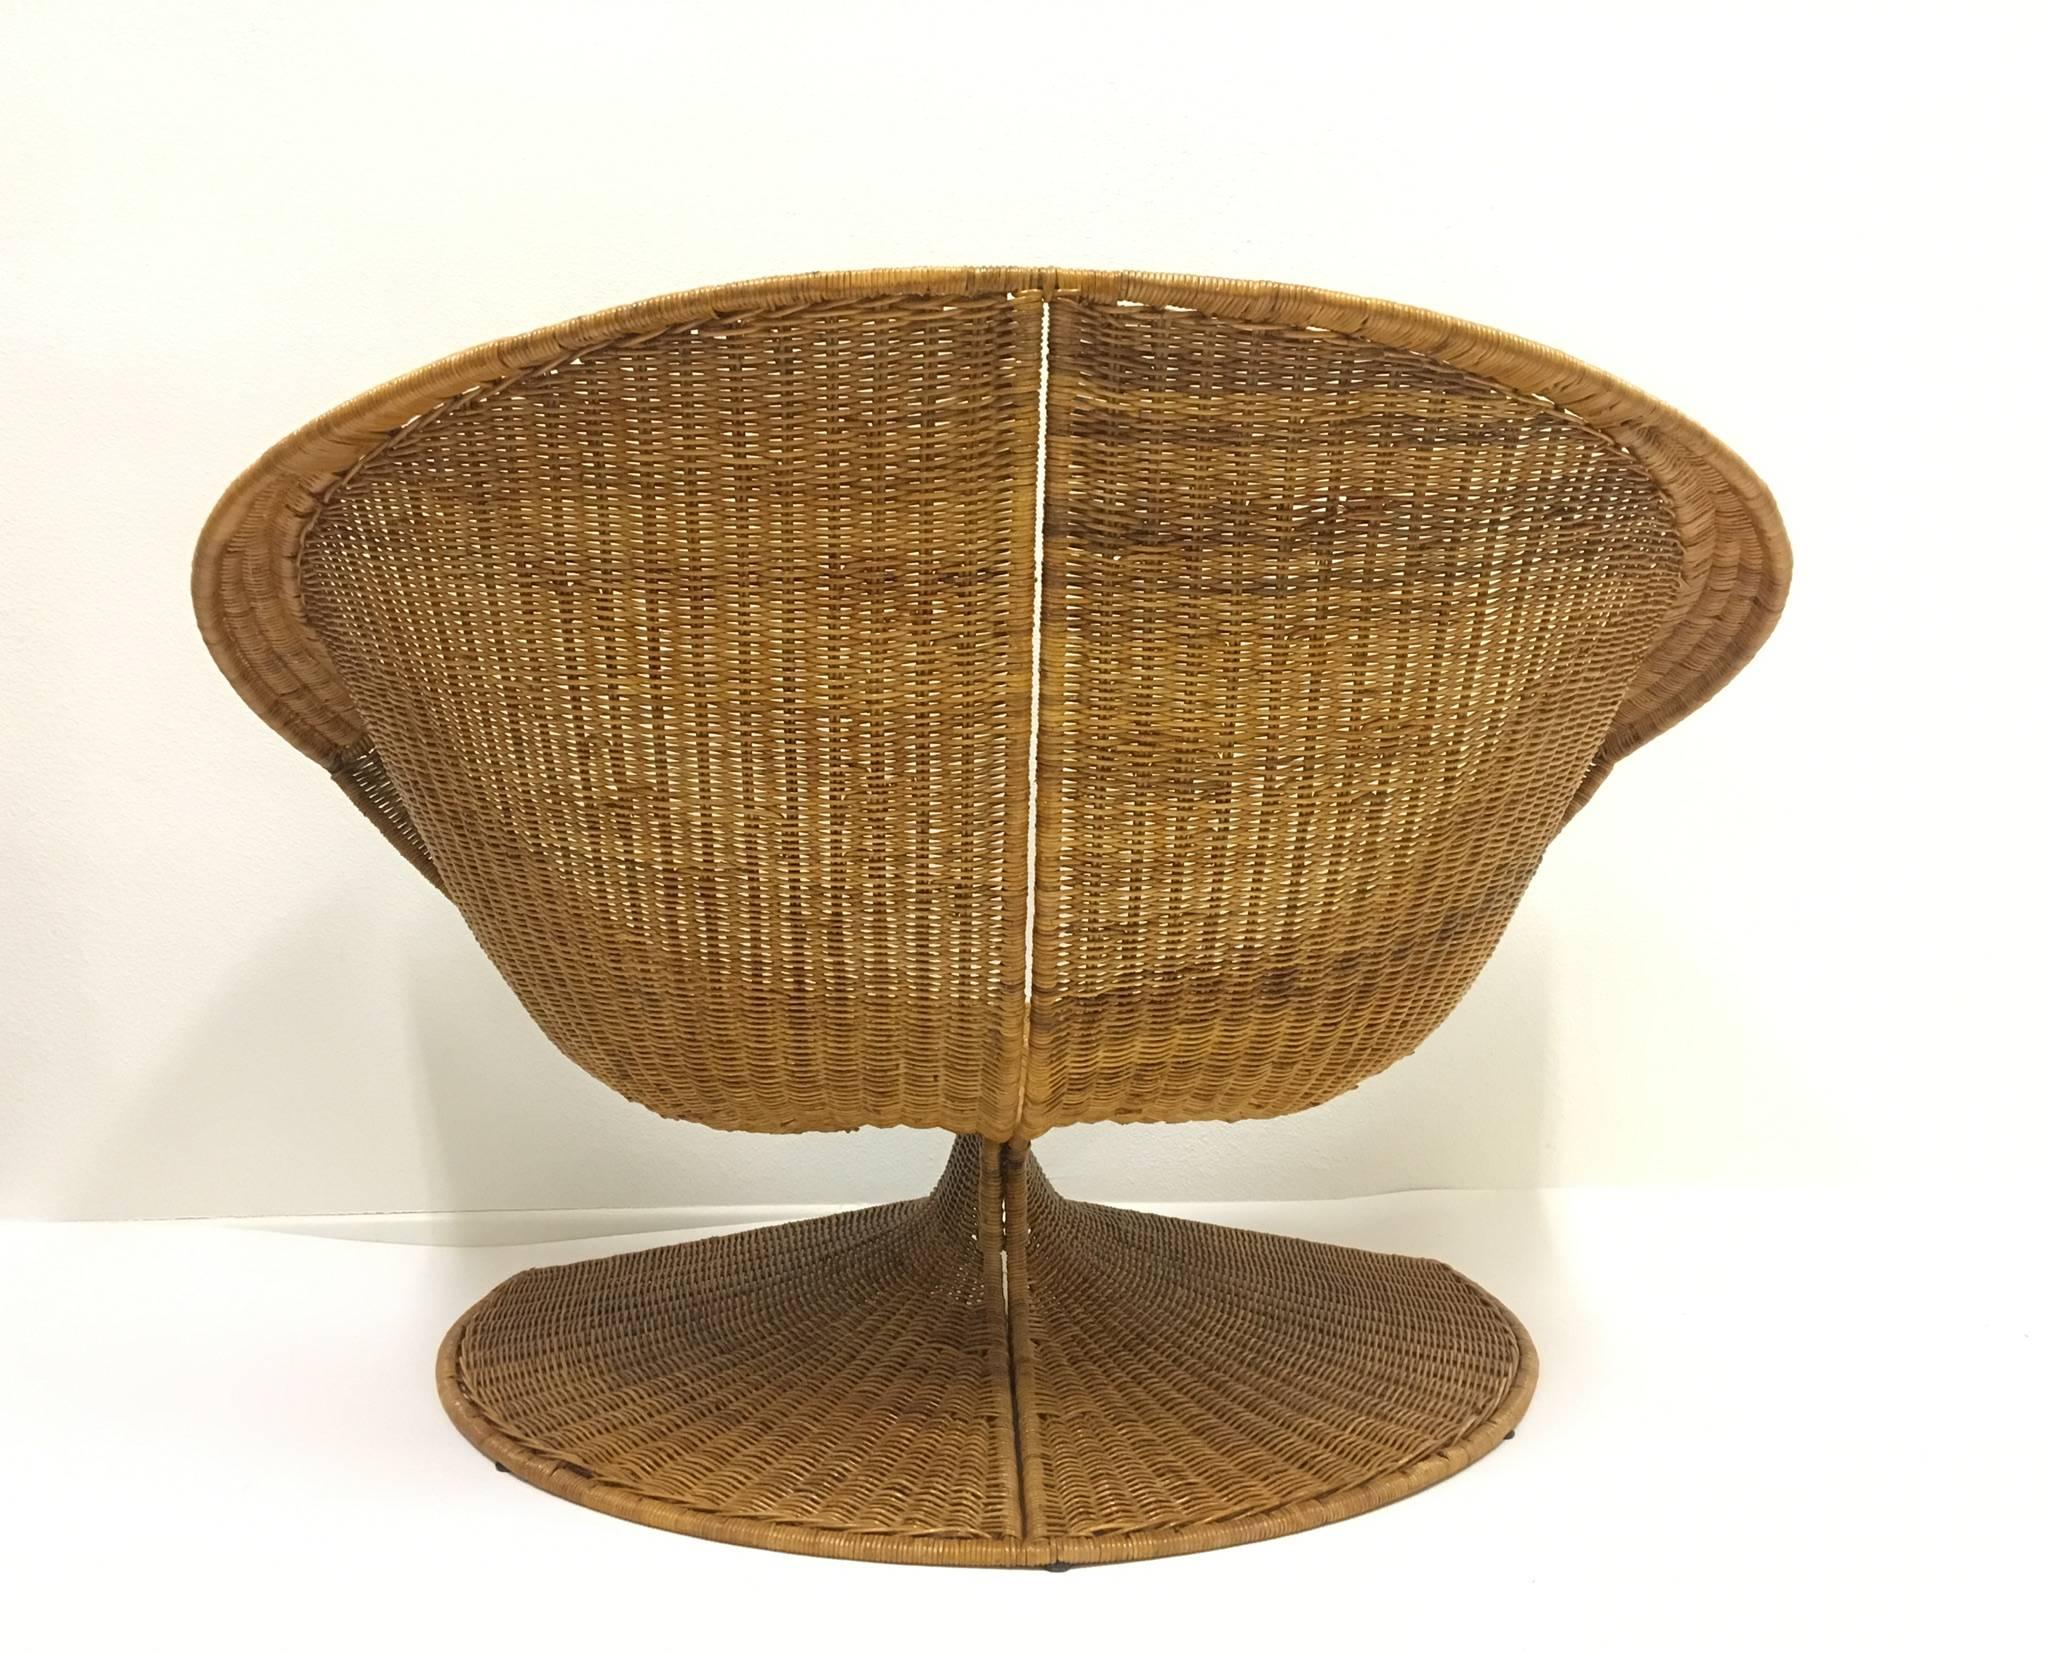 A sculptural and rare "Lotus" wicker lounge chair and ottoman designed by California designer Miller yee Fong for Tropi-Cal in the 1968 
It's rare to find the chair with the ottoman. The "Lotus" chair is an Iconic California